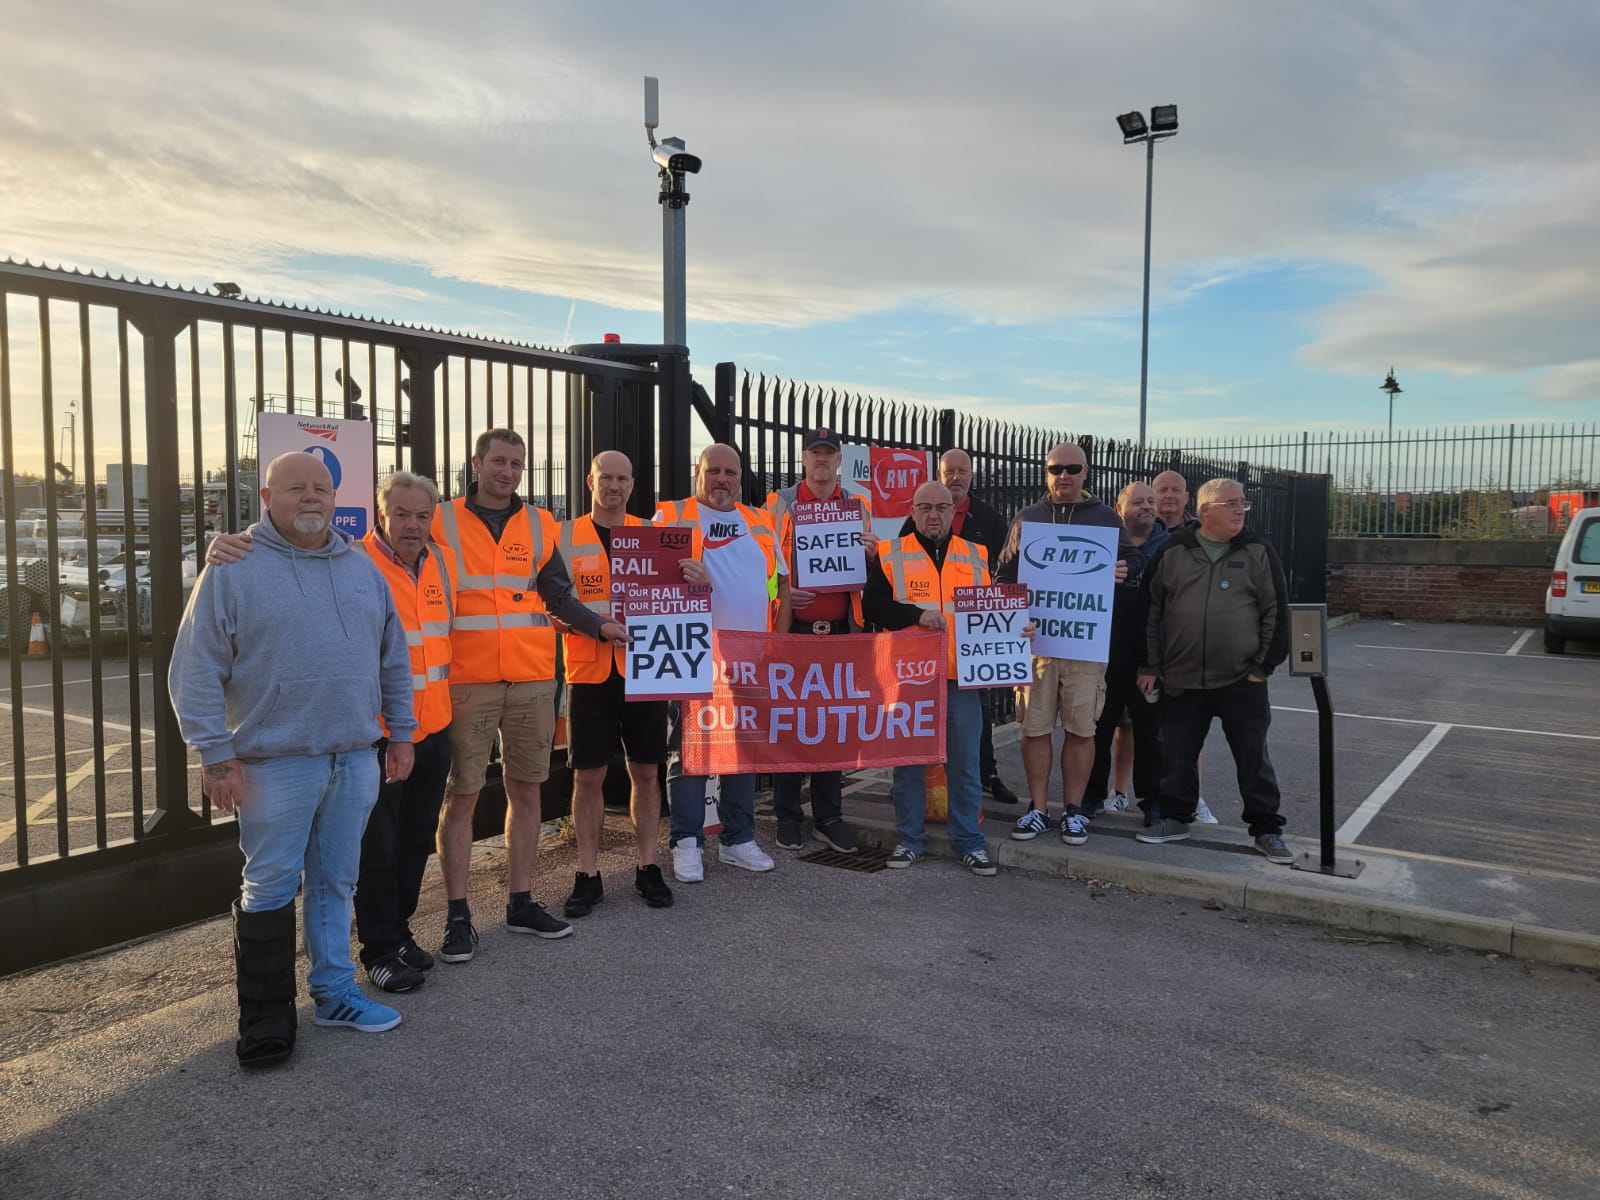 Image shows 10 union members on a picket line in hi-vis jackets on a sunny day holding a red 'our rail our future' banner